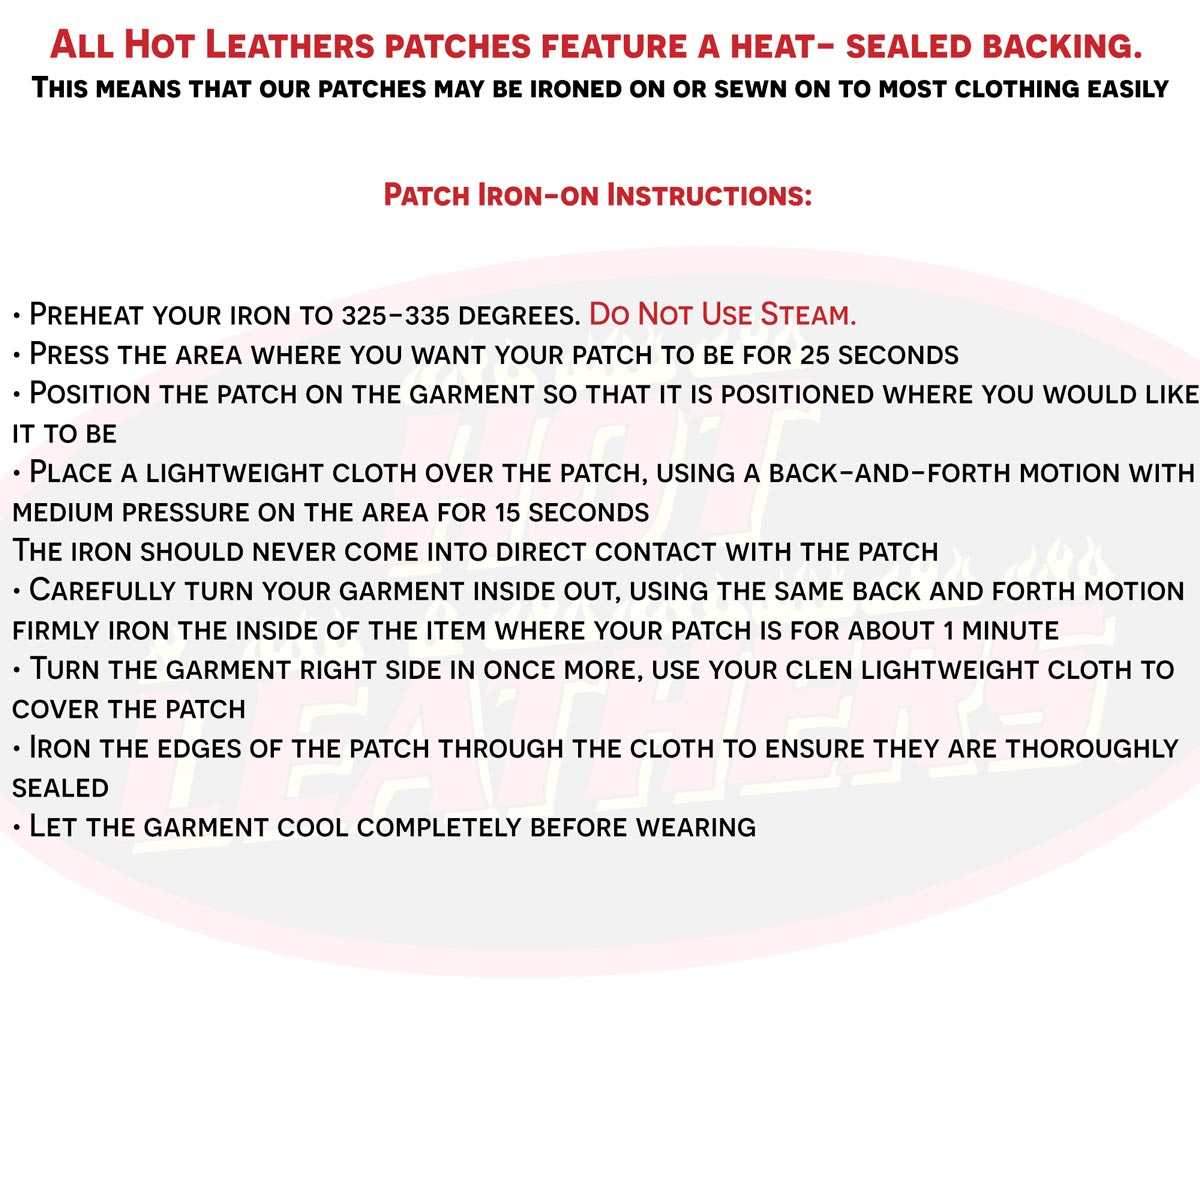 Hot Leathers PPL9597 Warning May Contain Alcohol 4"x1" Patch